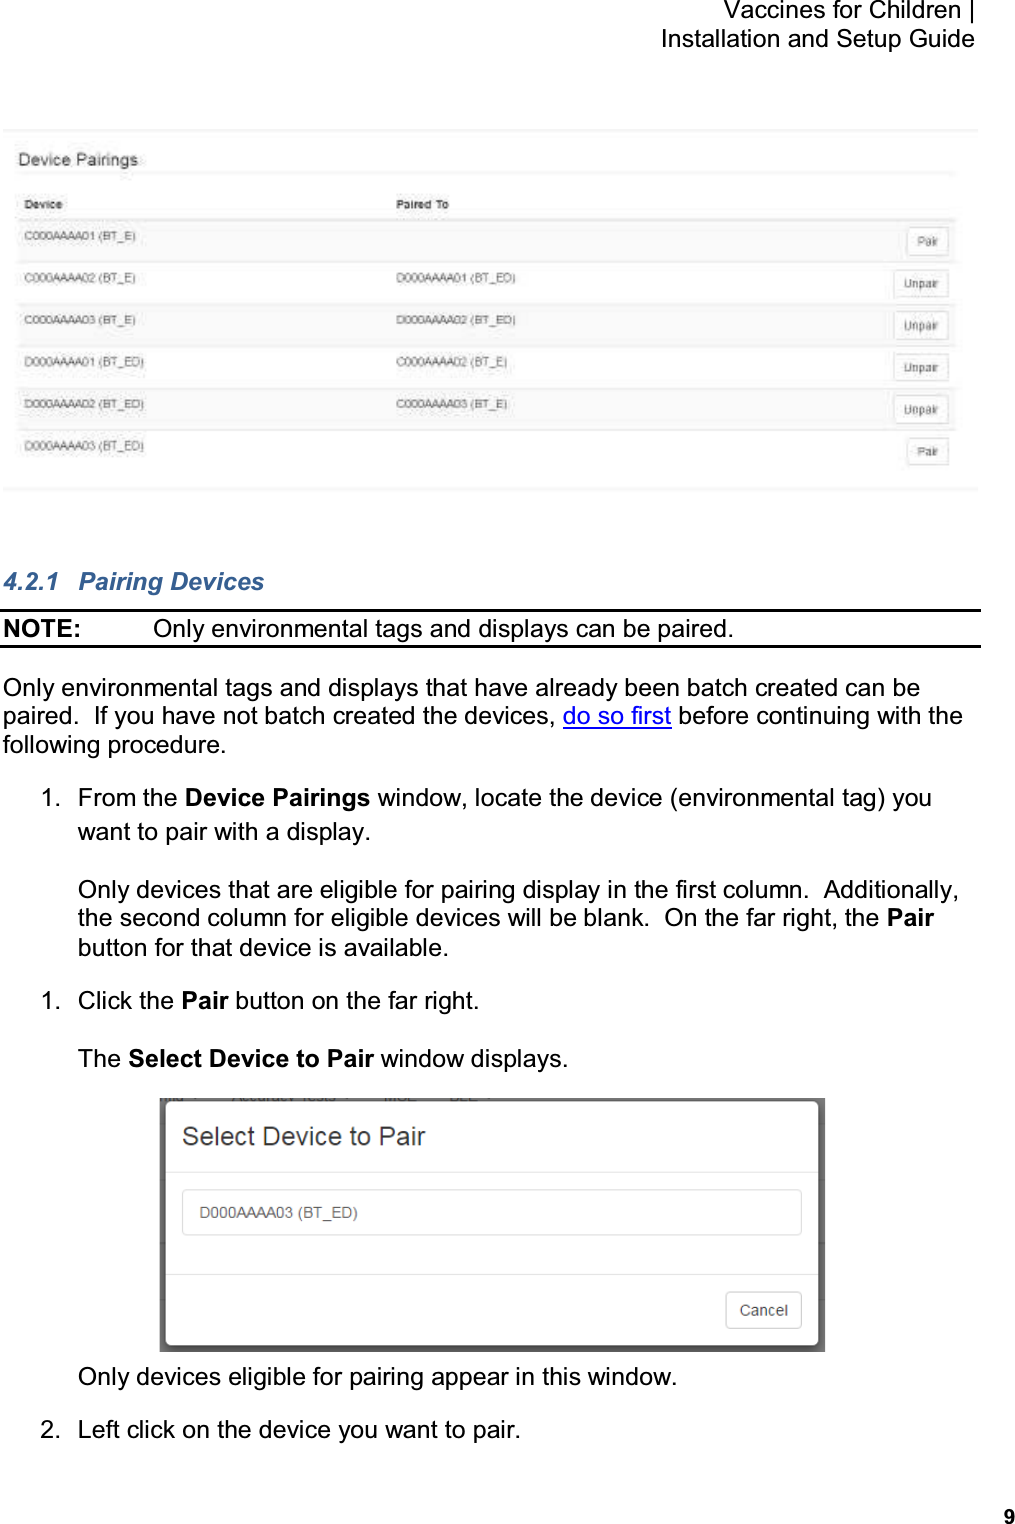           9 Vaccines for Children |  Installation and Setup Guide   4.2.1  Pairing Devices NOTE:    Only environmental tags and displays can be paired. Only environmental tags and displays that have already been batch created can be paired.  If you have not batch created the devices, do so first before continuing with the following procedure. 1.  From the Device Pairings window, locate the device (environmental tag) you want to pair with a display. Only devices that are eligible for pairing display in the first column.  Additionally, the second column for eligible devices will be blank.  On the far right, the Pair button for that device is available. 1.  Click the Pair button on the far right. The Select Device to Pair window displays.  Only devices eligible for pairing appear in this window. 2.  Left click on the device you want to pair. 